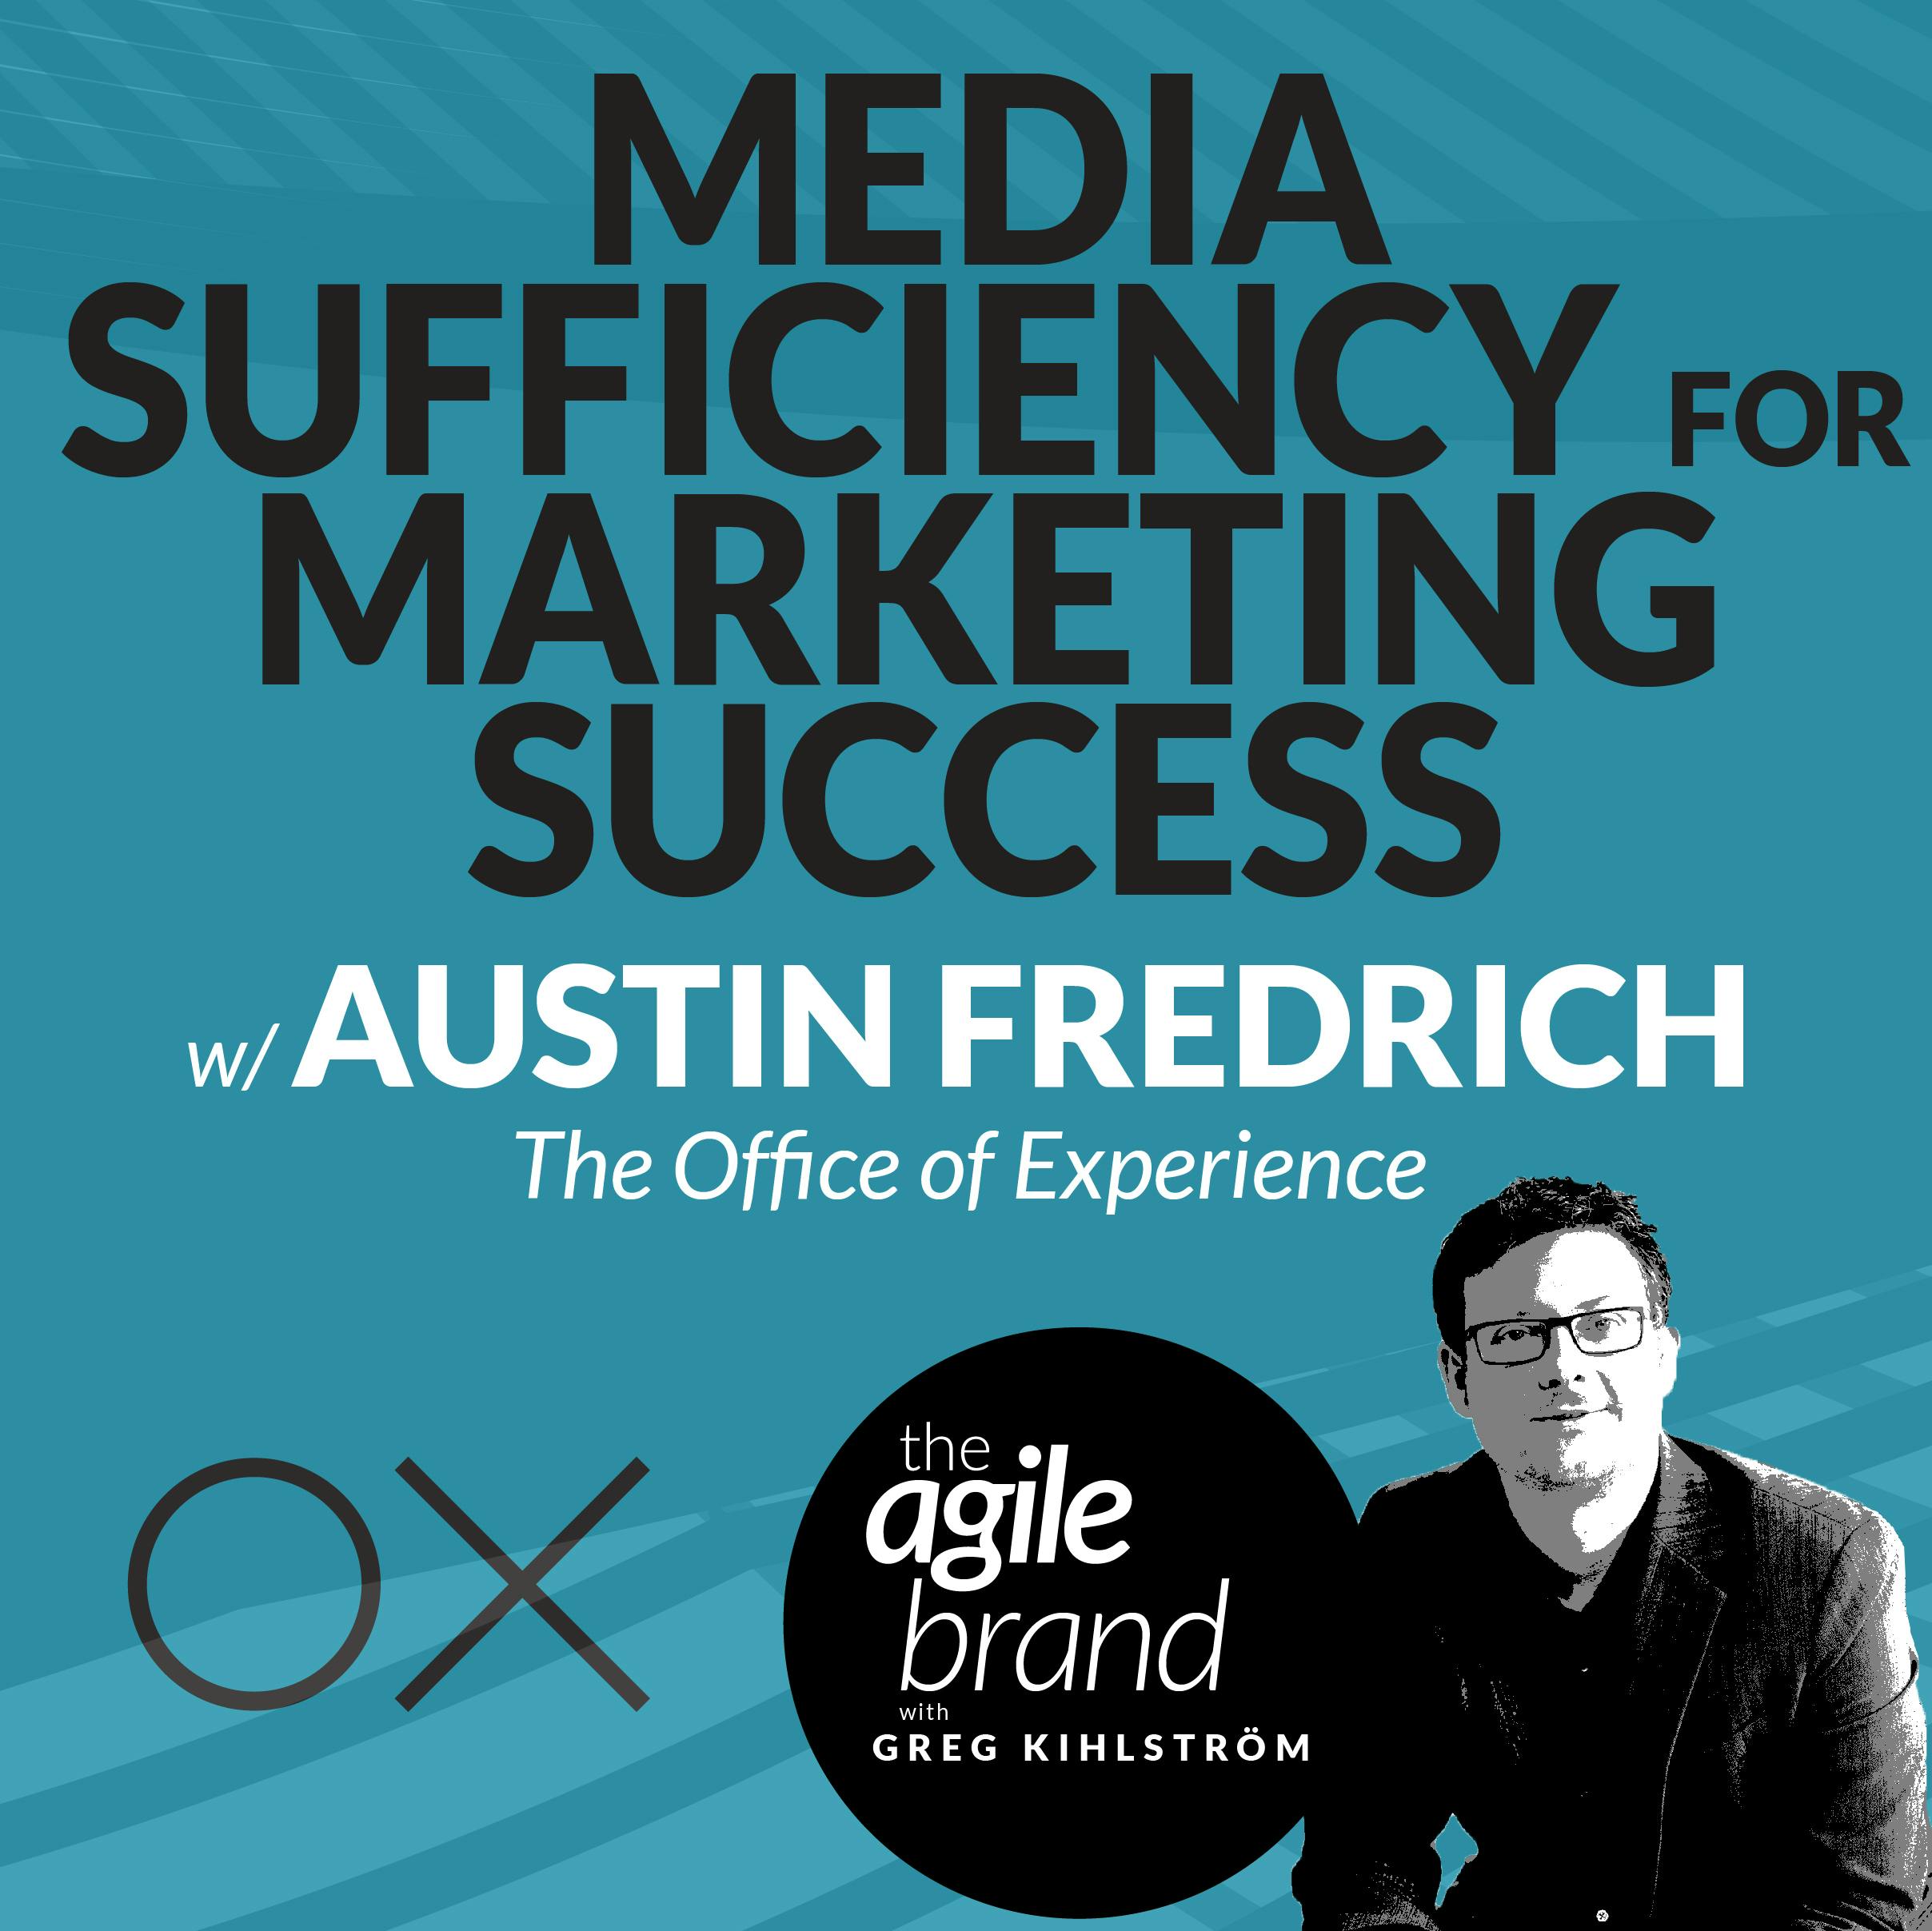 #425: Media sufficiency for greater marketing success with Austin Fredrich, The Office of Experience